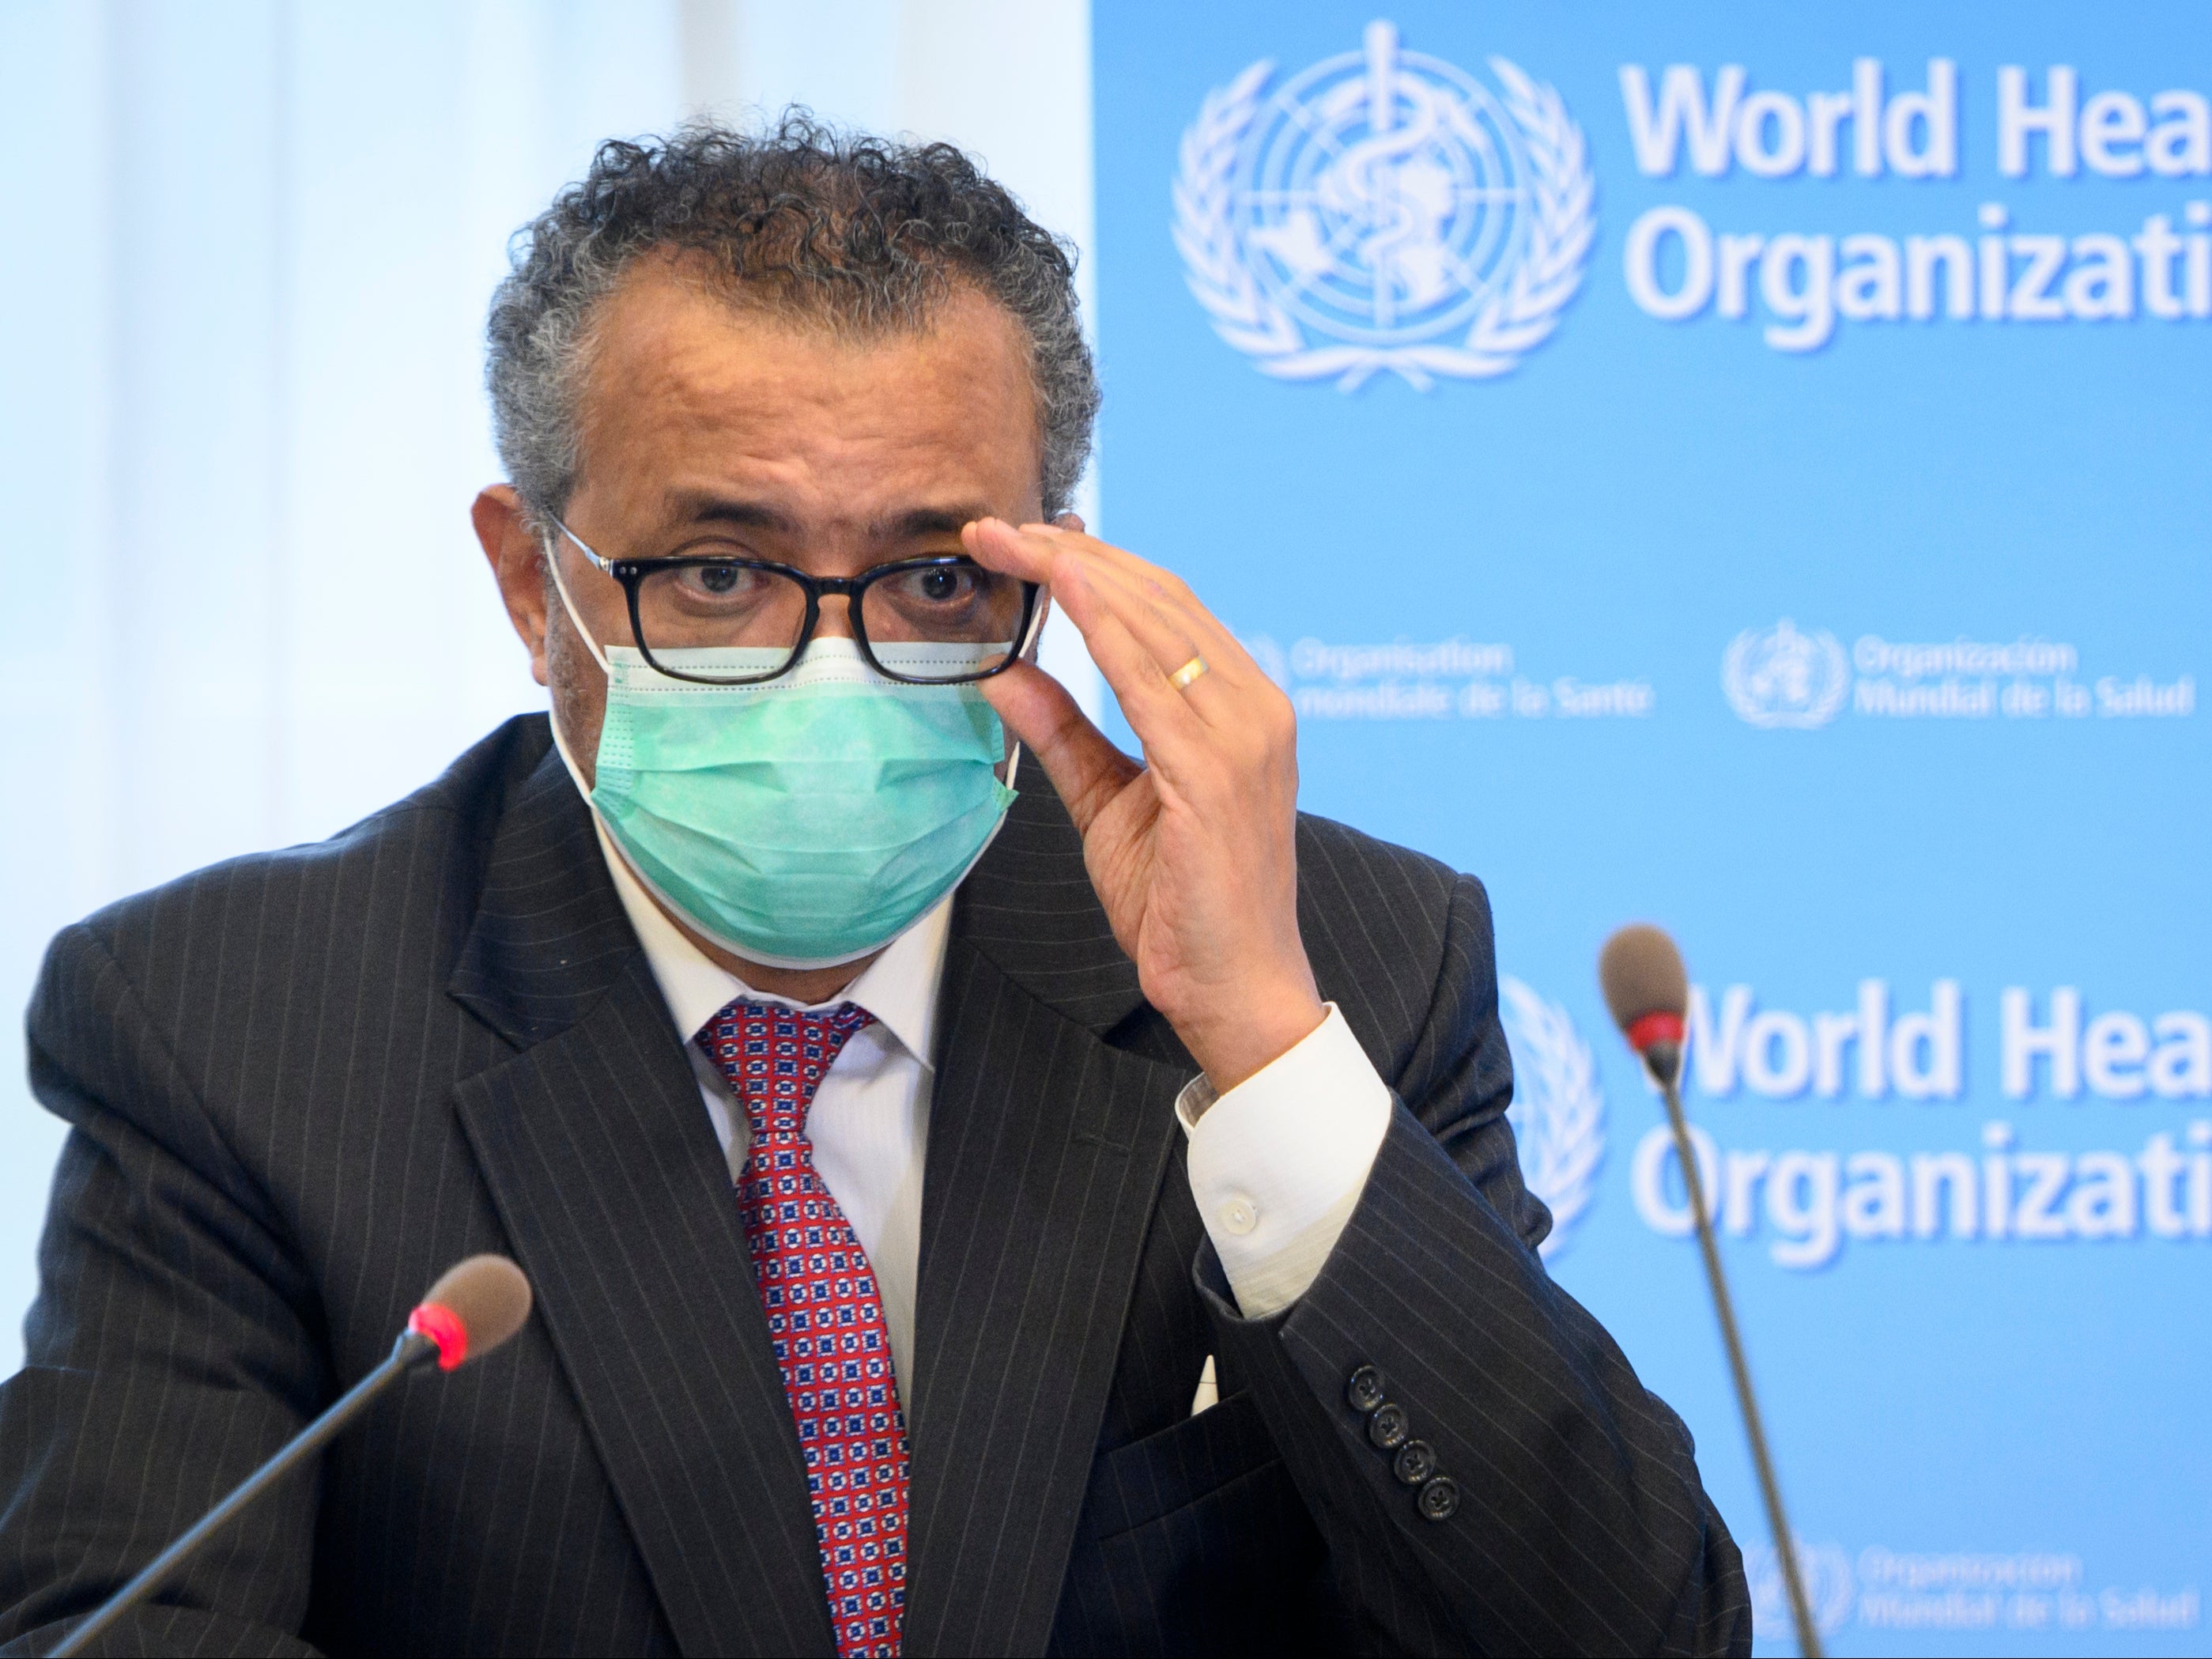 The WHO director-general says the world’s common goal must be to get 70 per cent of every country’s population vaccinated against Covid-19 by middle of next year